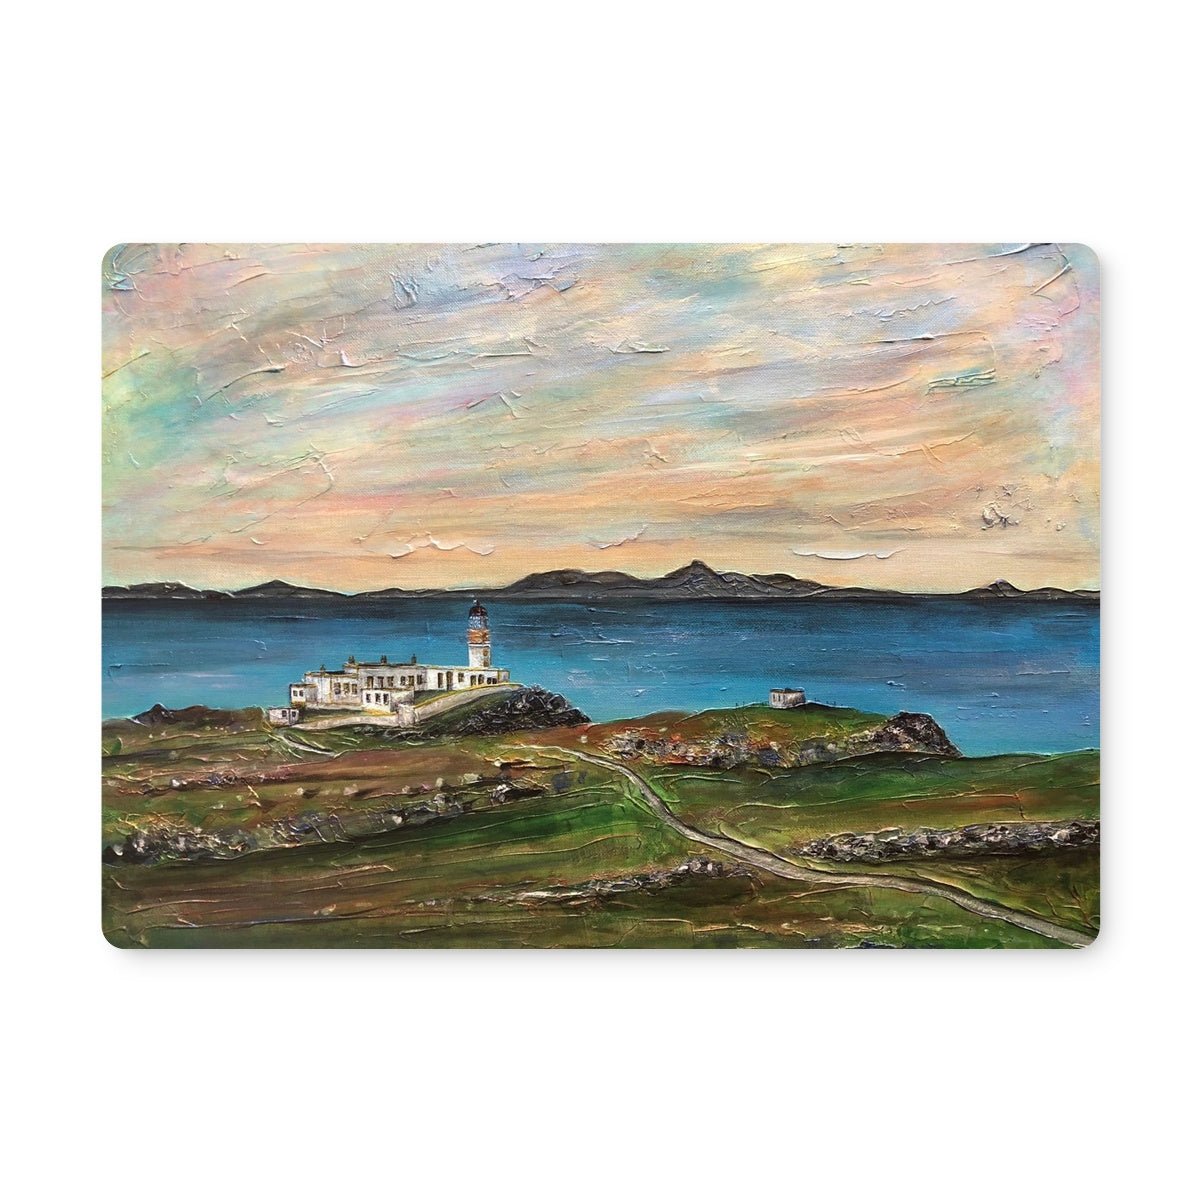 Neist Point Skye Art Gifts Placemat-Placemats-Skye Art Gallery-Single Placemat-Paintings, Prints, Homeware, Art Gifts From Scotland By Scottish Artist Kevin Hunter